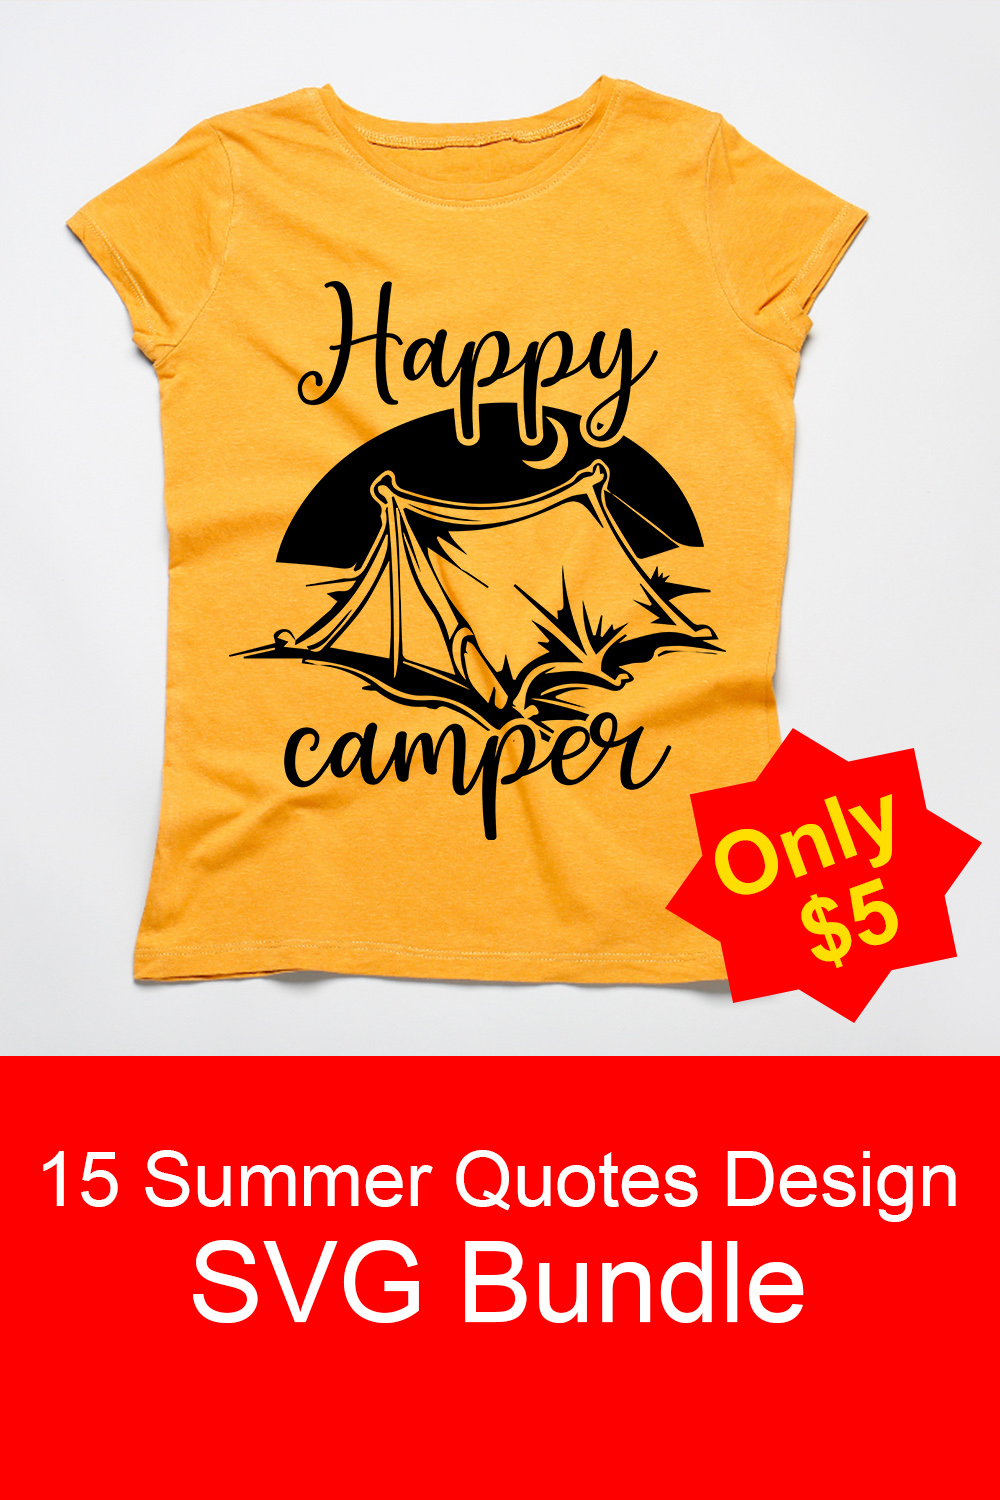 Image of a T-shirt with a beautiful inscription Happy camper